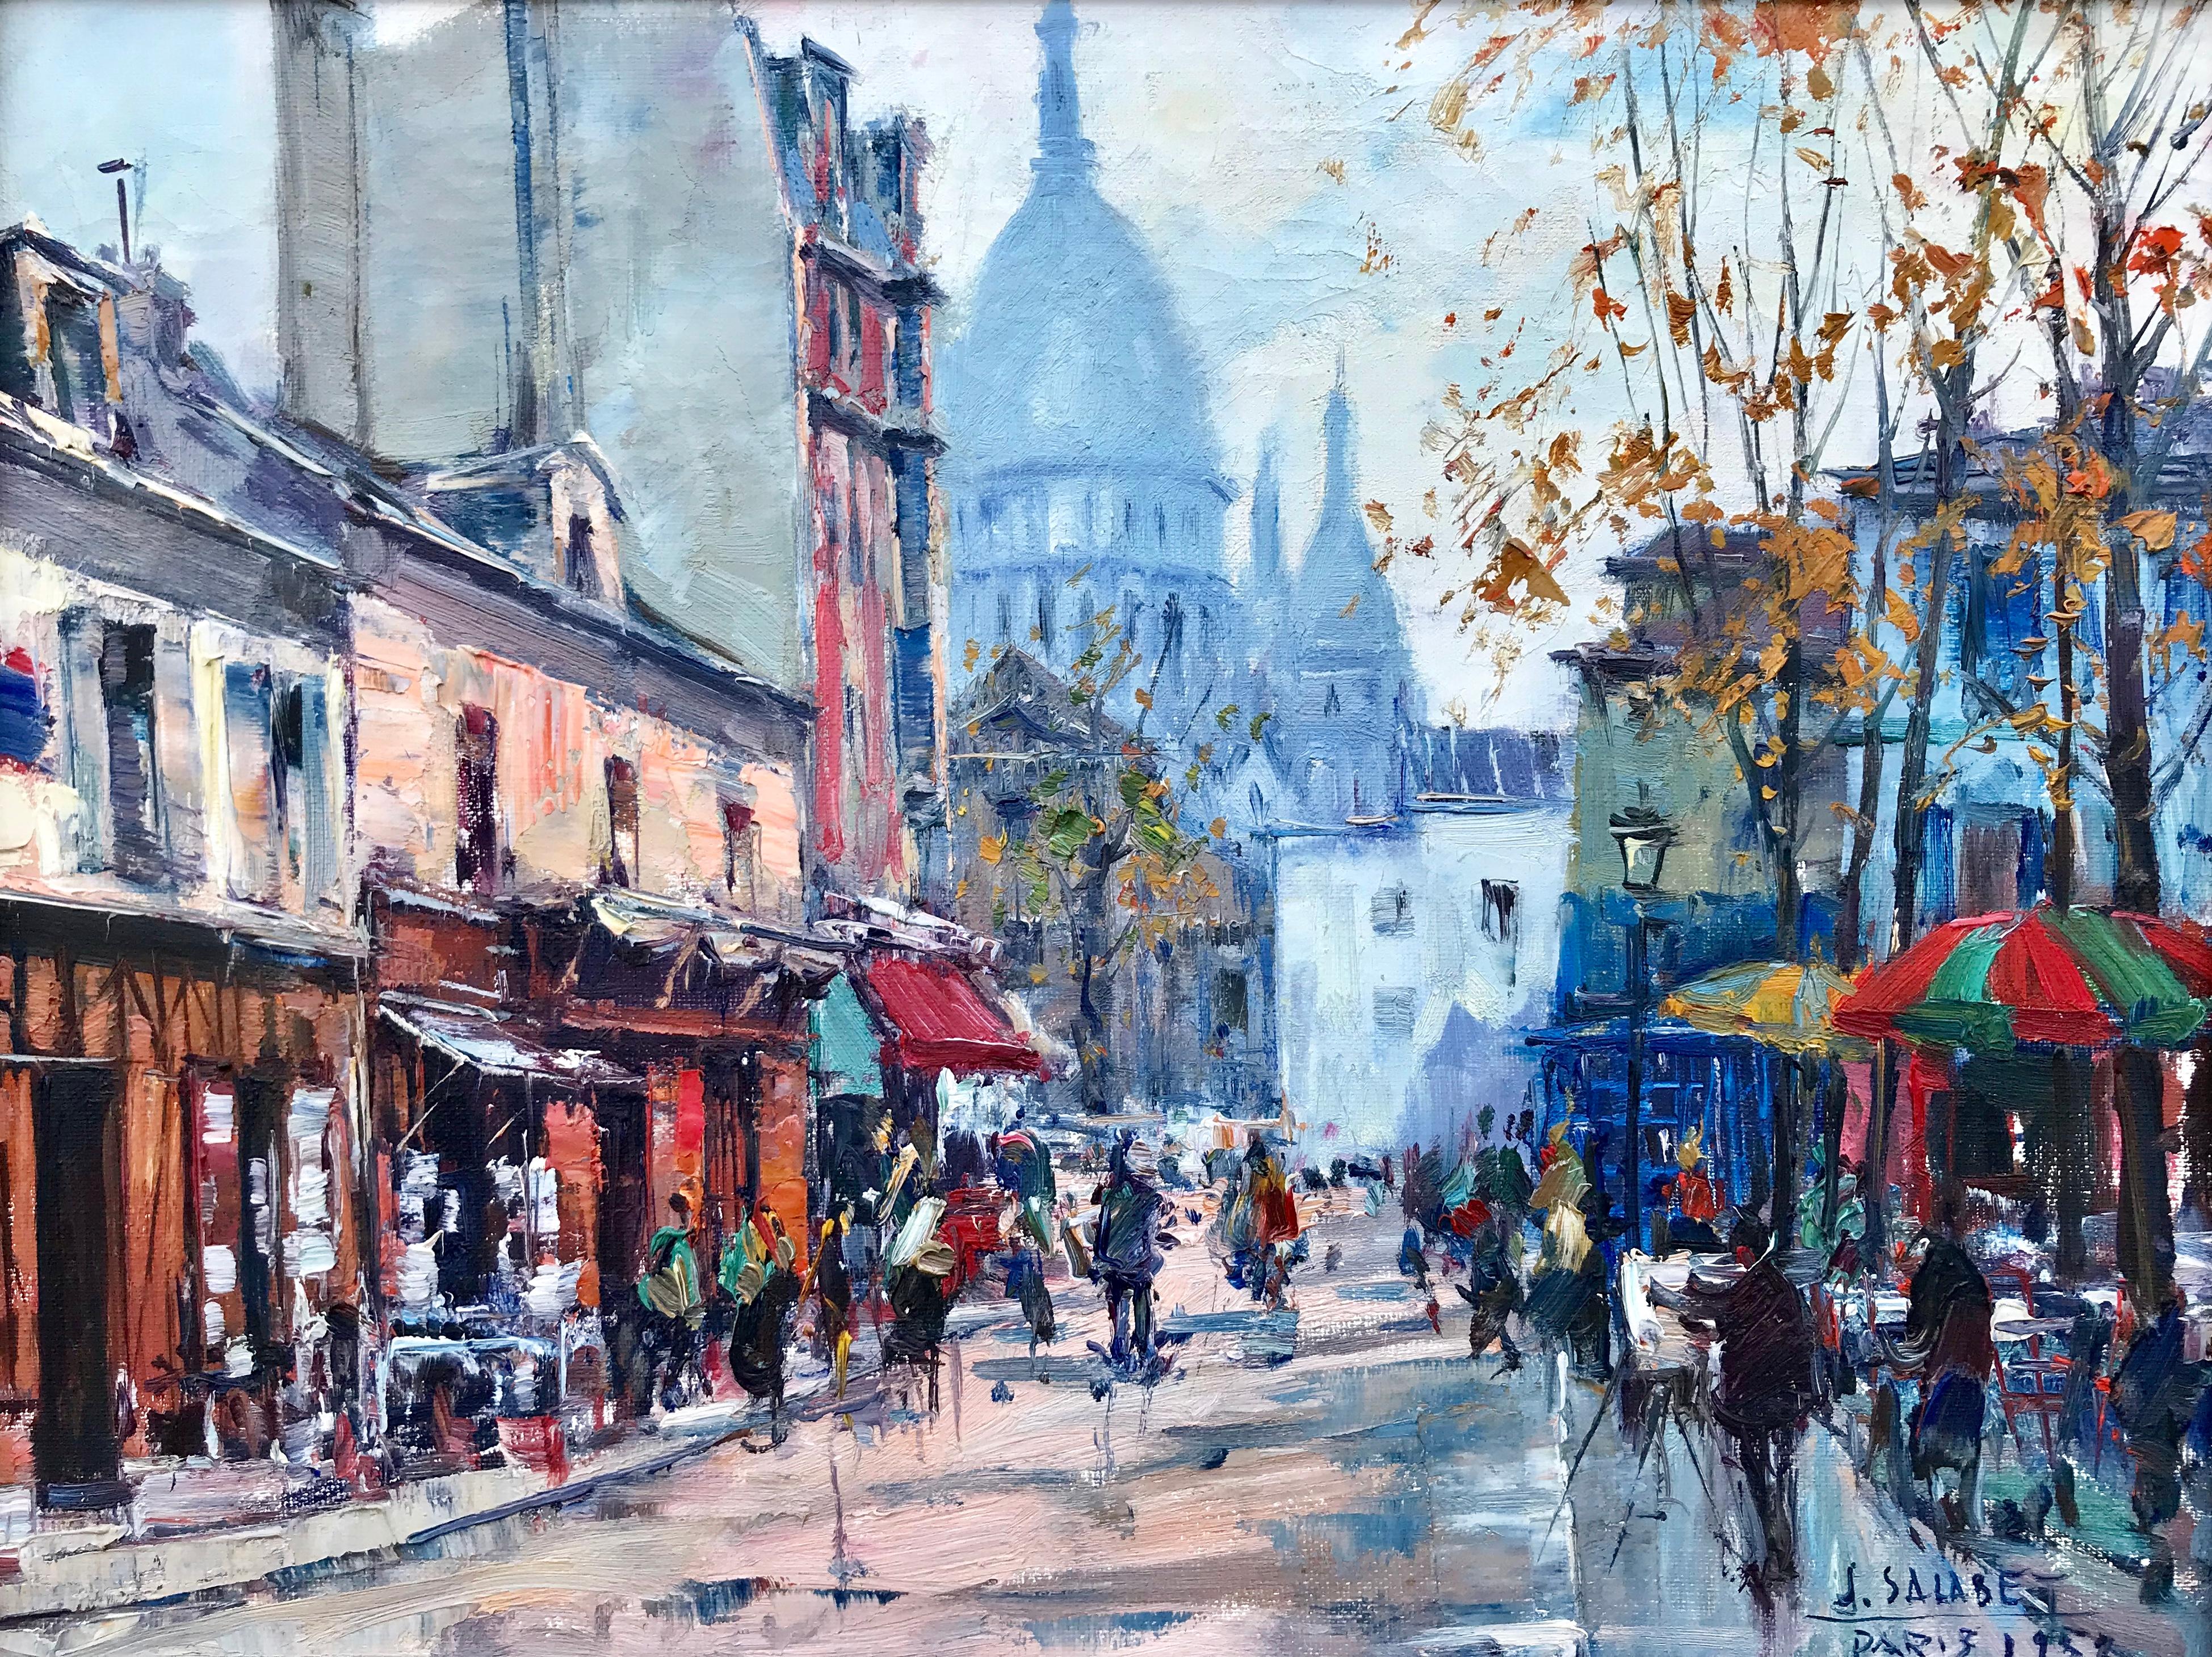 Jean Salabet Figurative Painting – “View of Sacre Coeur”